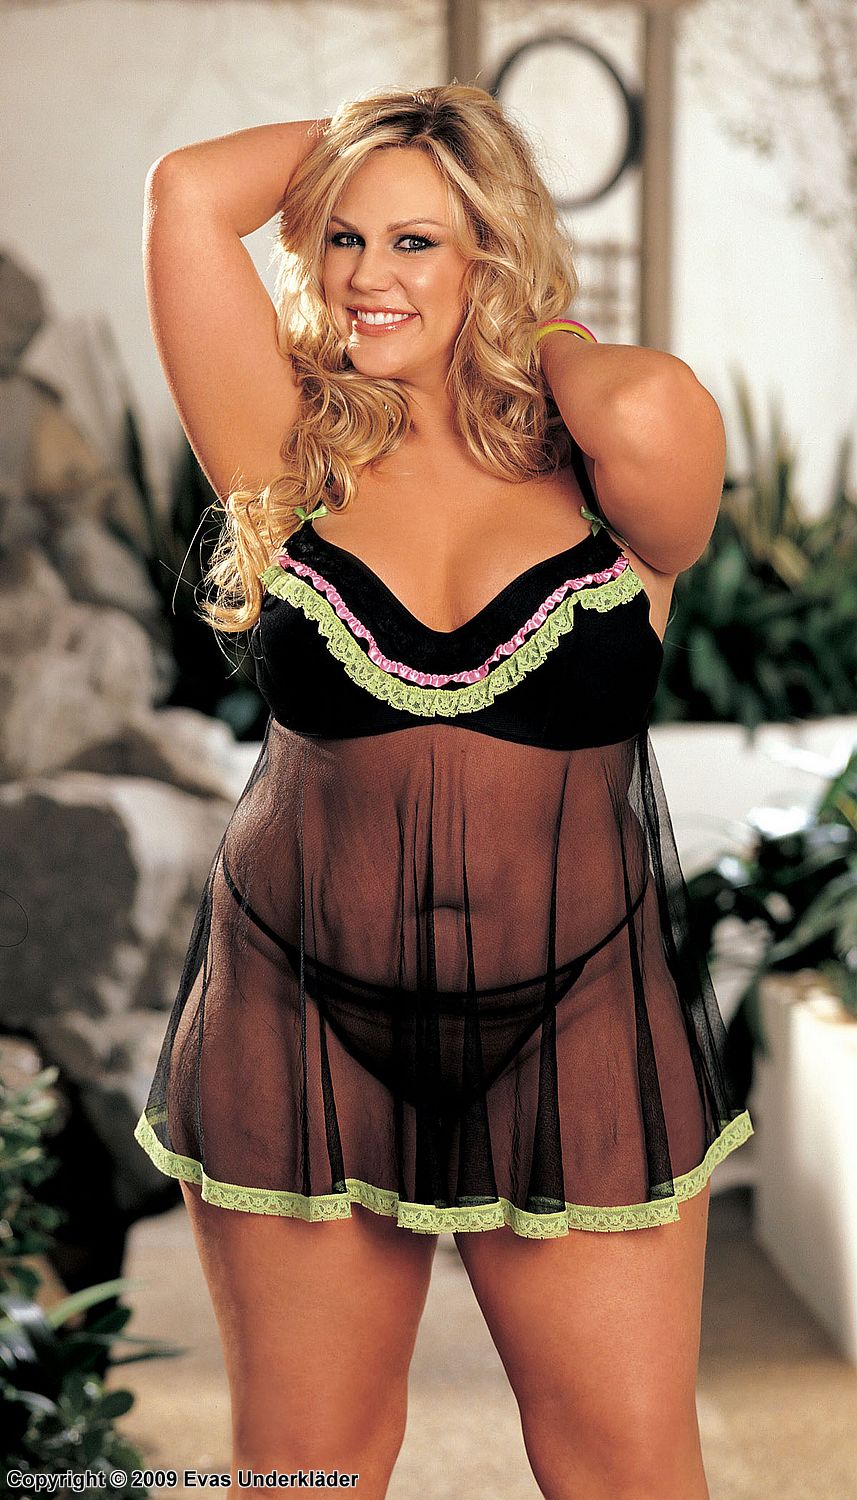 Baby doll, plus size